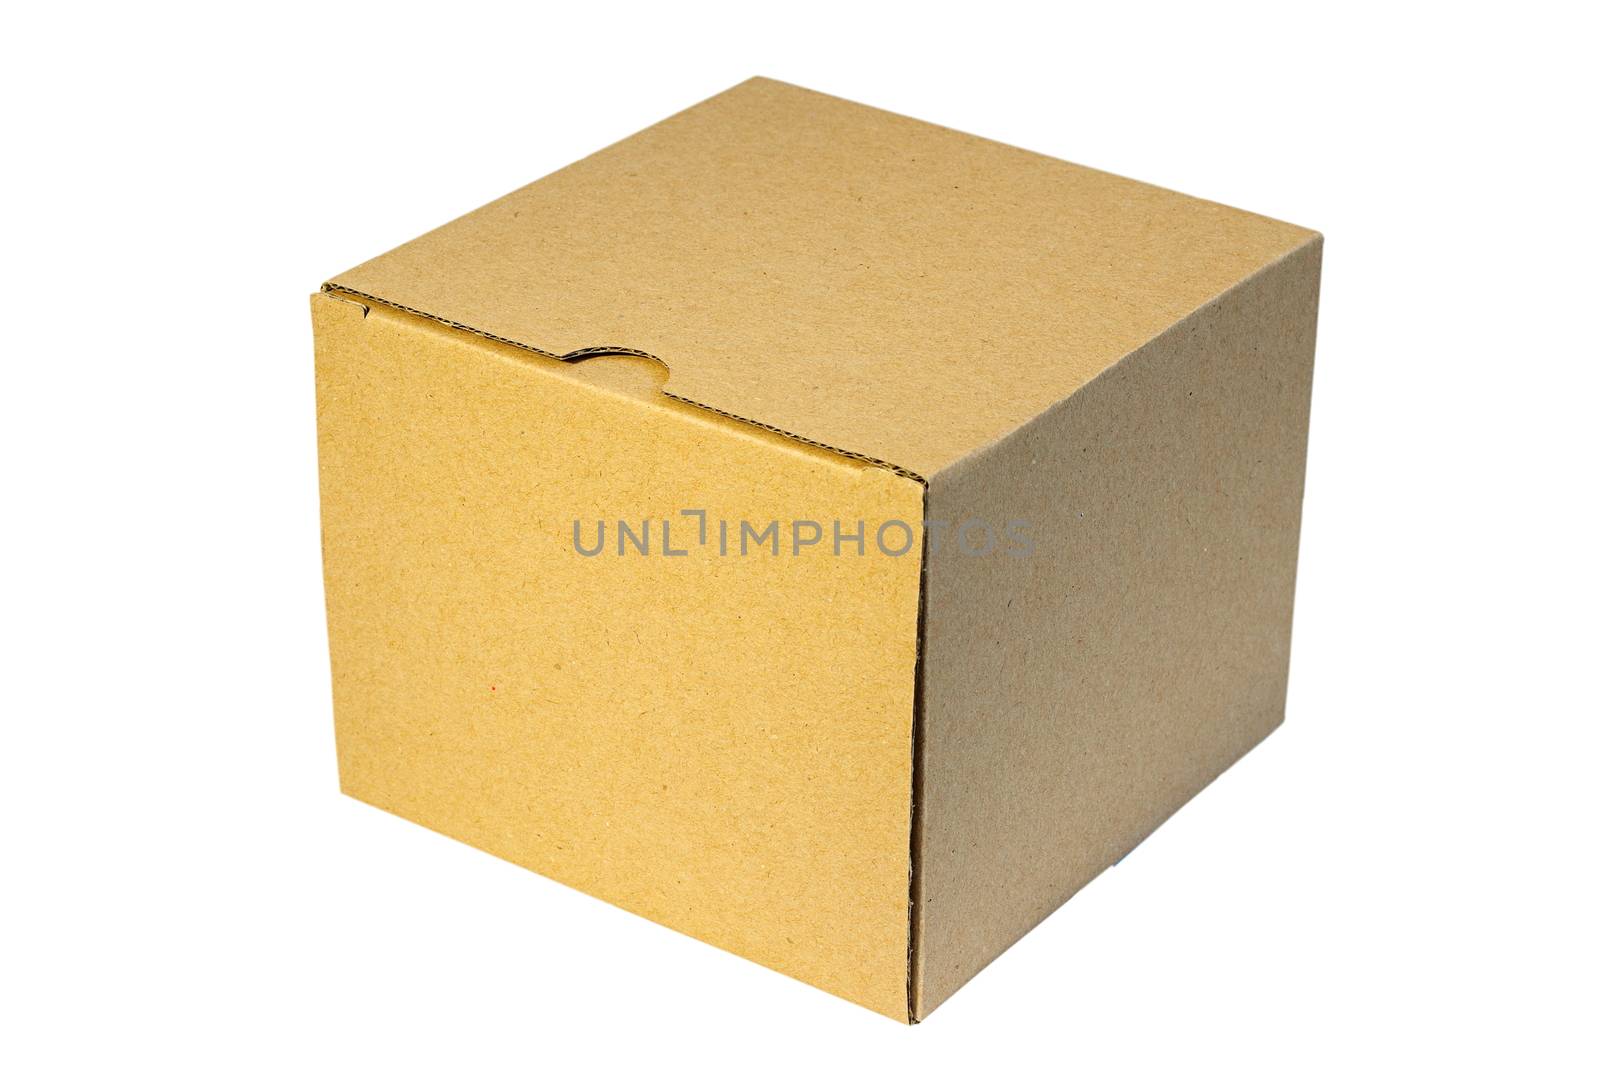 carton old closed box isolated over white background